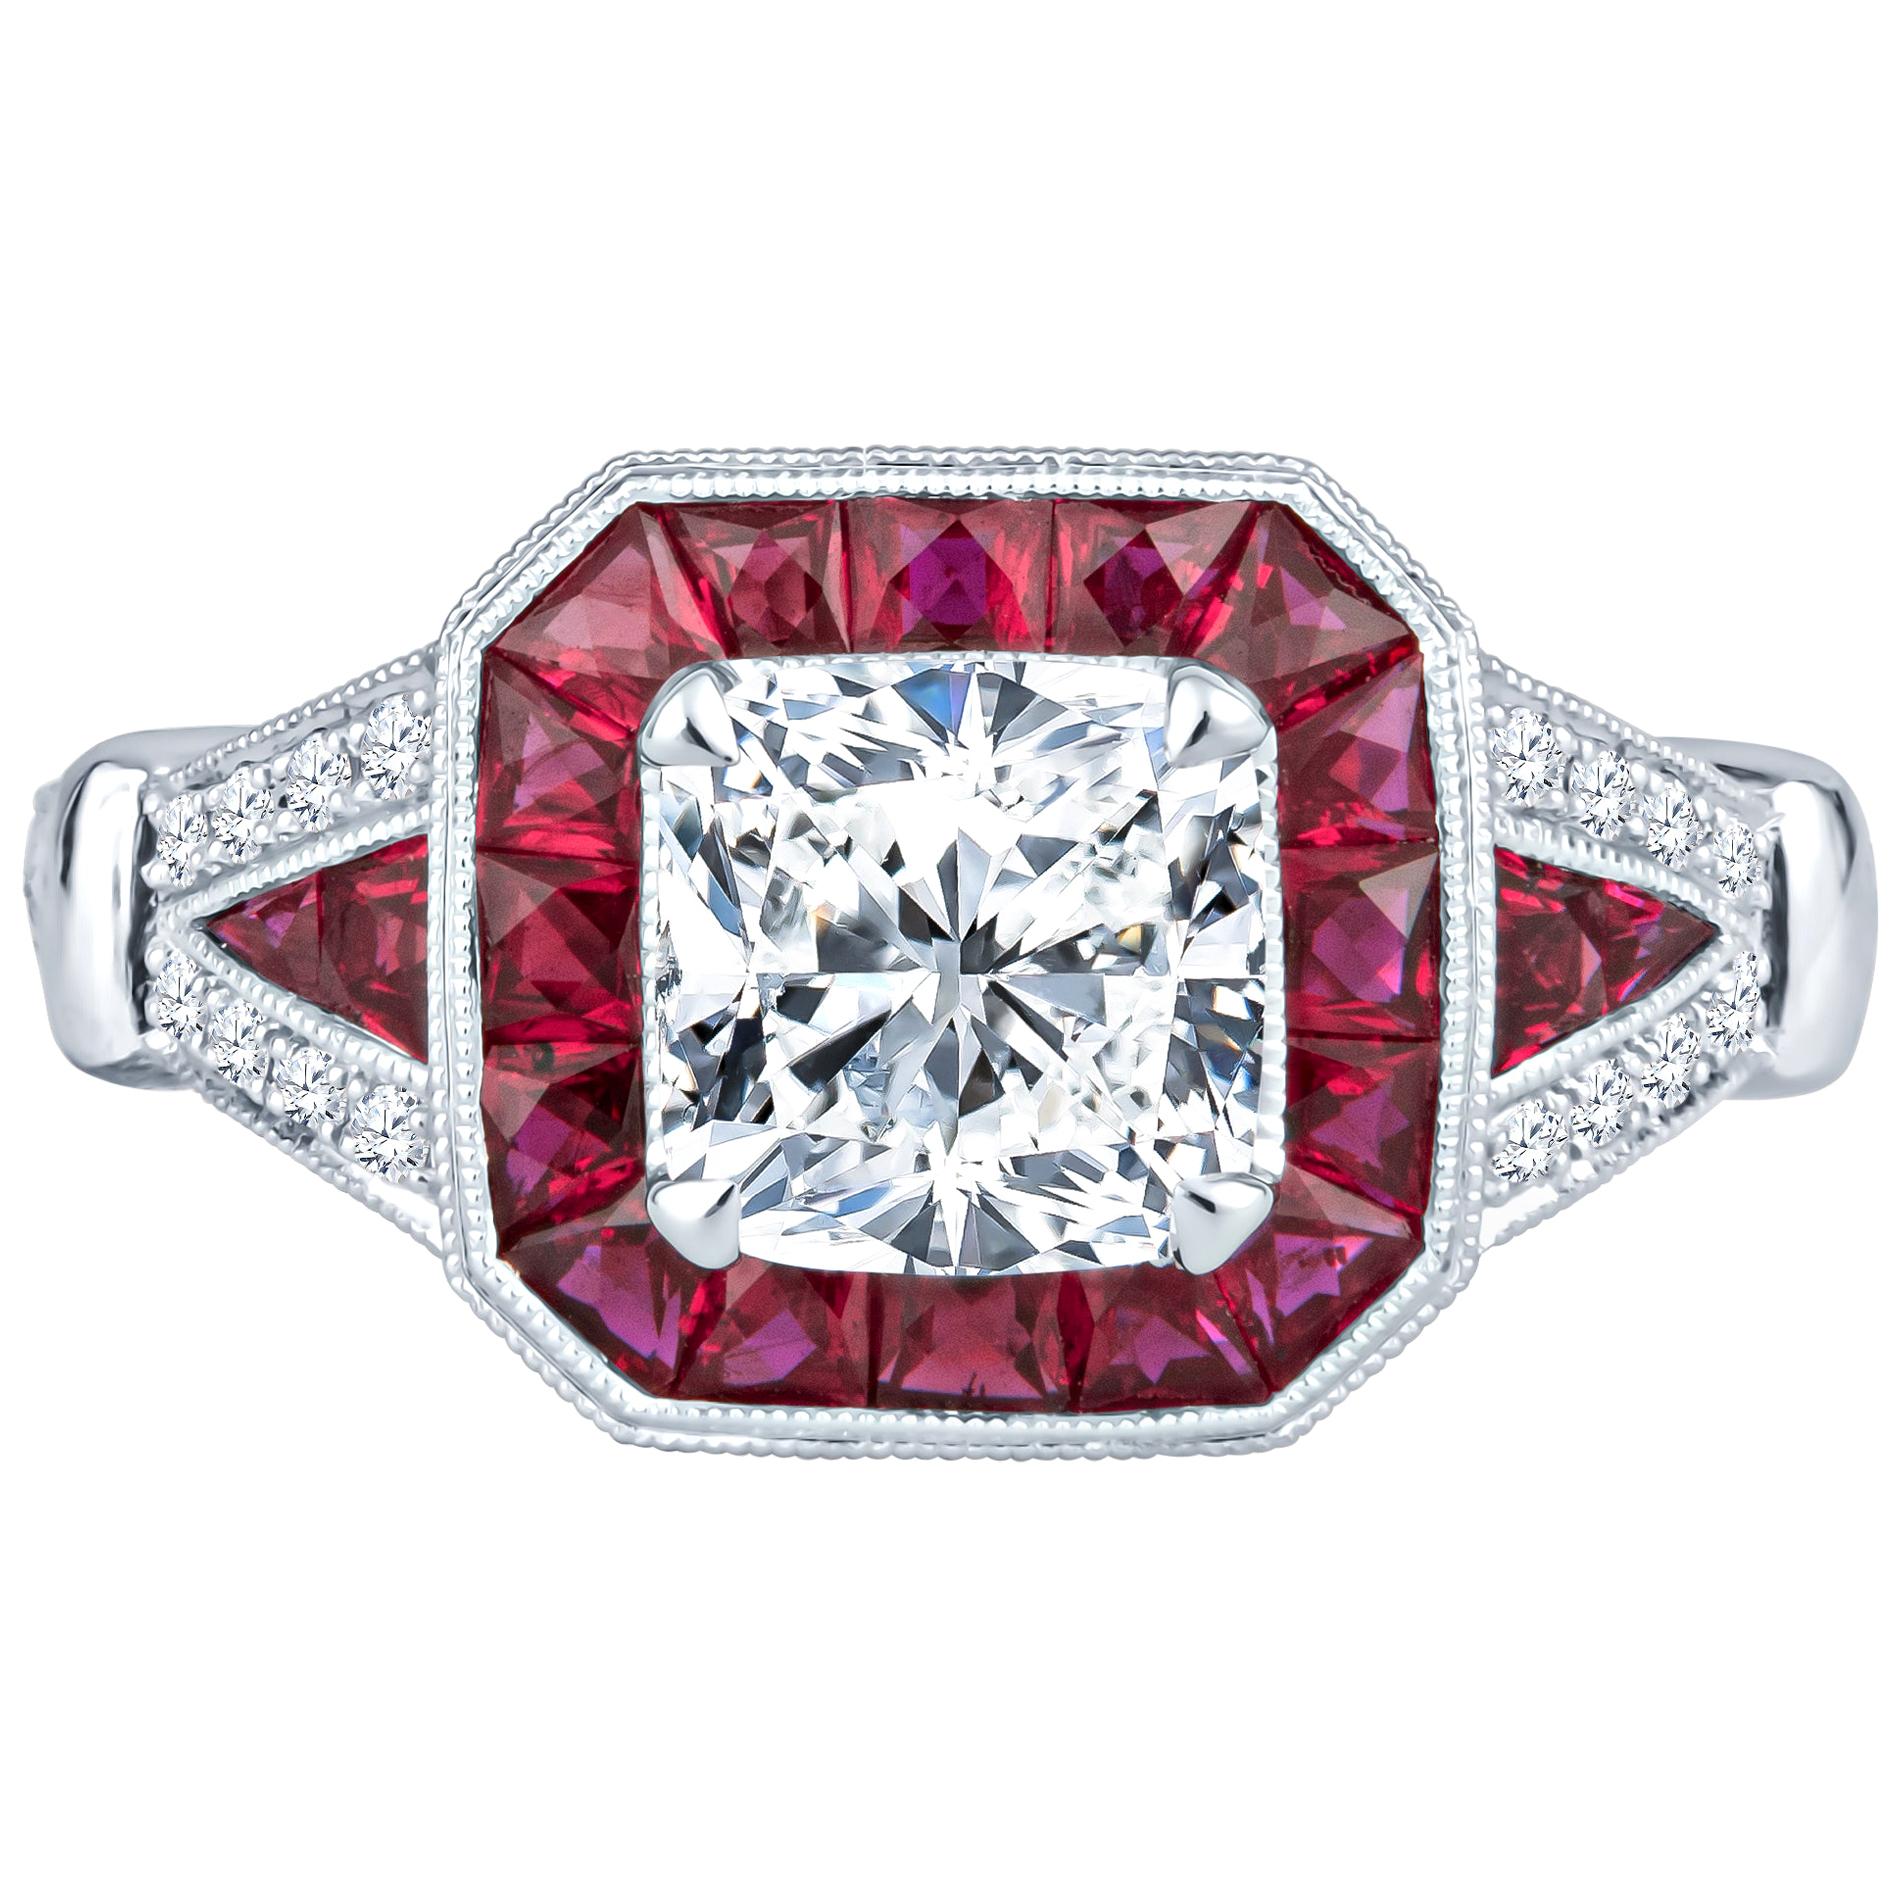 1.60ct Cushion Diamond, GIA Certified, with 1.23ct Ruby Accent Vintage Inspired For Sale